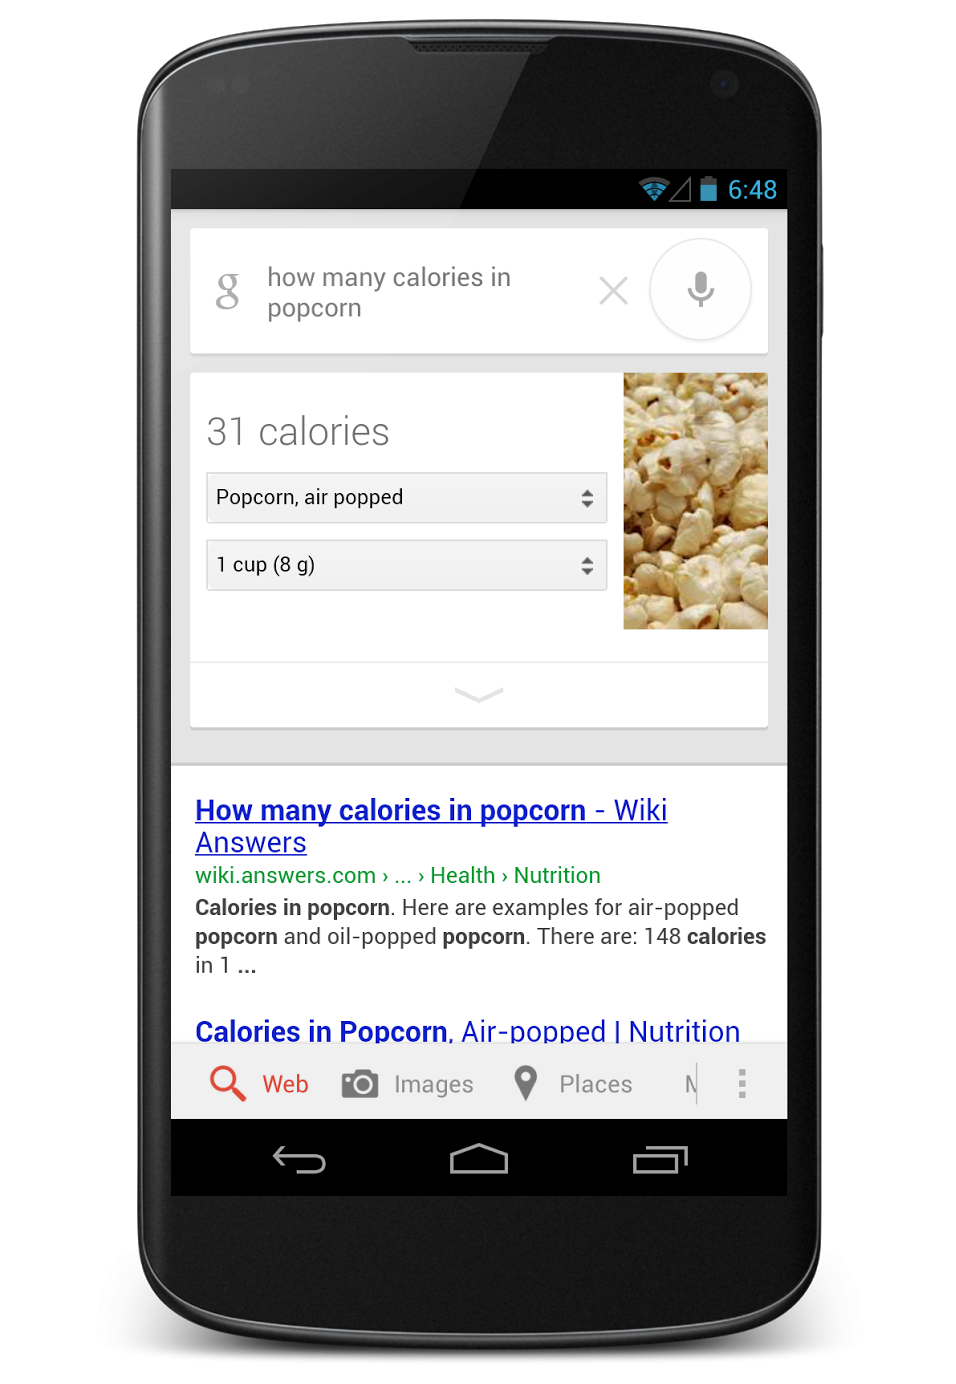 Google announces nutritional information cards coming soon to Google Search - Phandroid